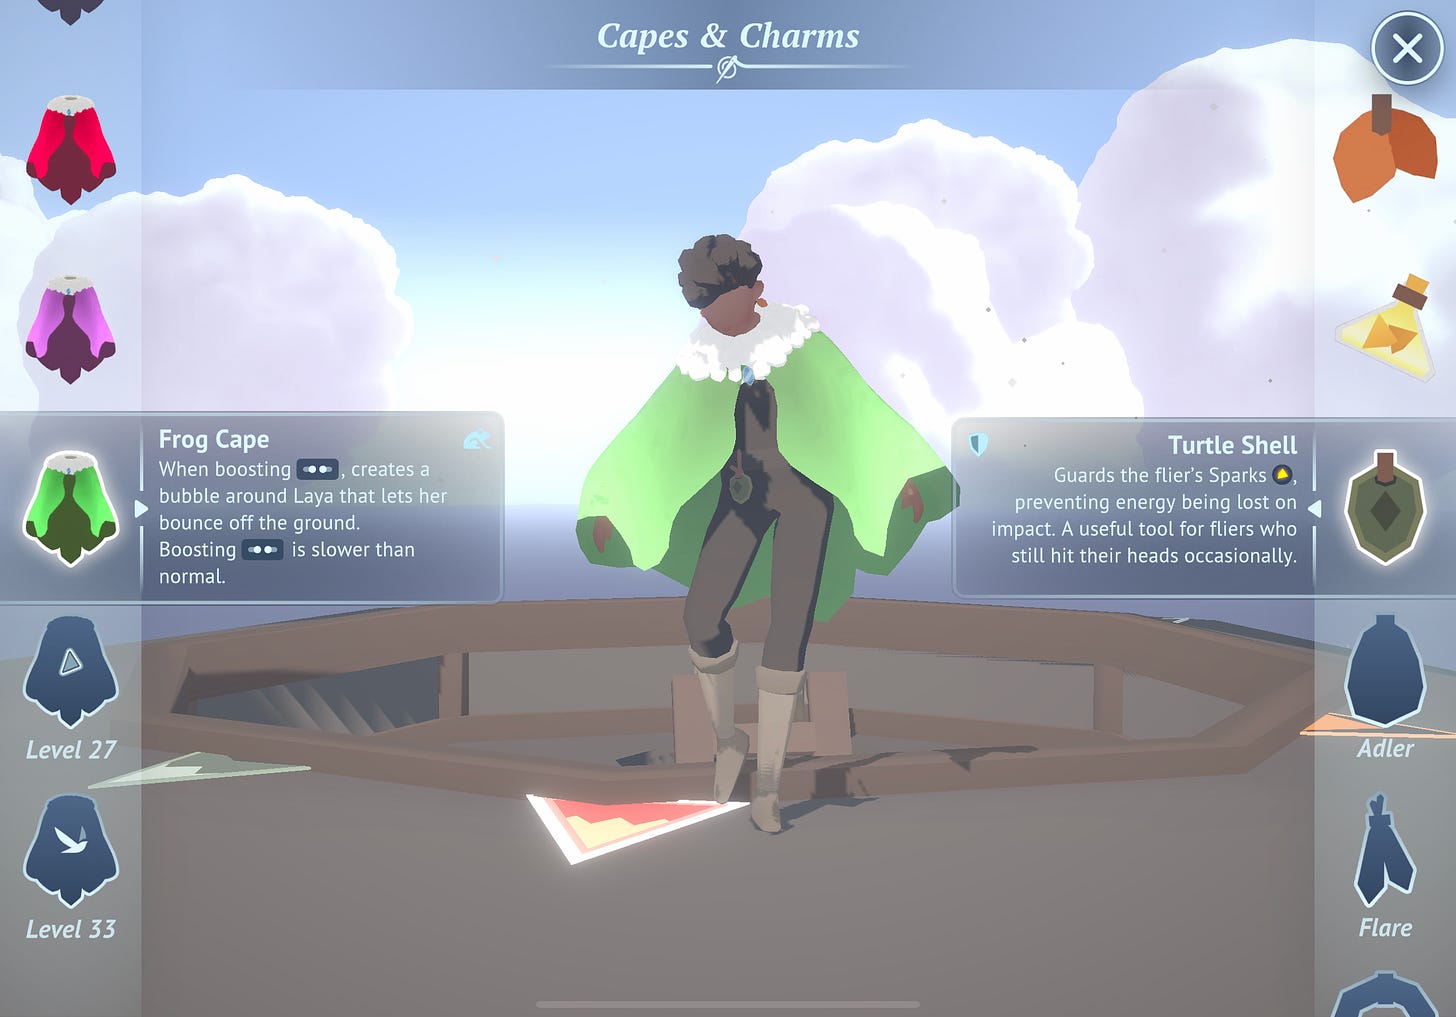 Capes and Charms. Two columns of capes and charms on each side of the screen. Frog cape on left, that lets you boost and bounce off the ground. Turtle shell on right, that guards your sparks on collisions.